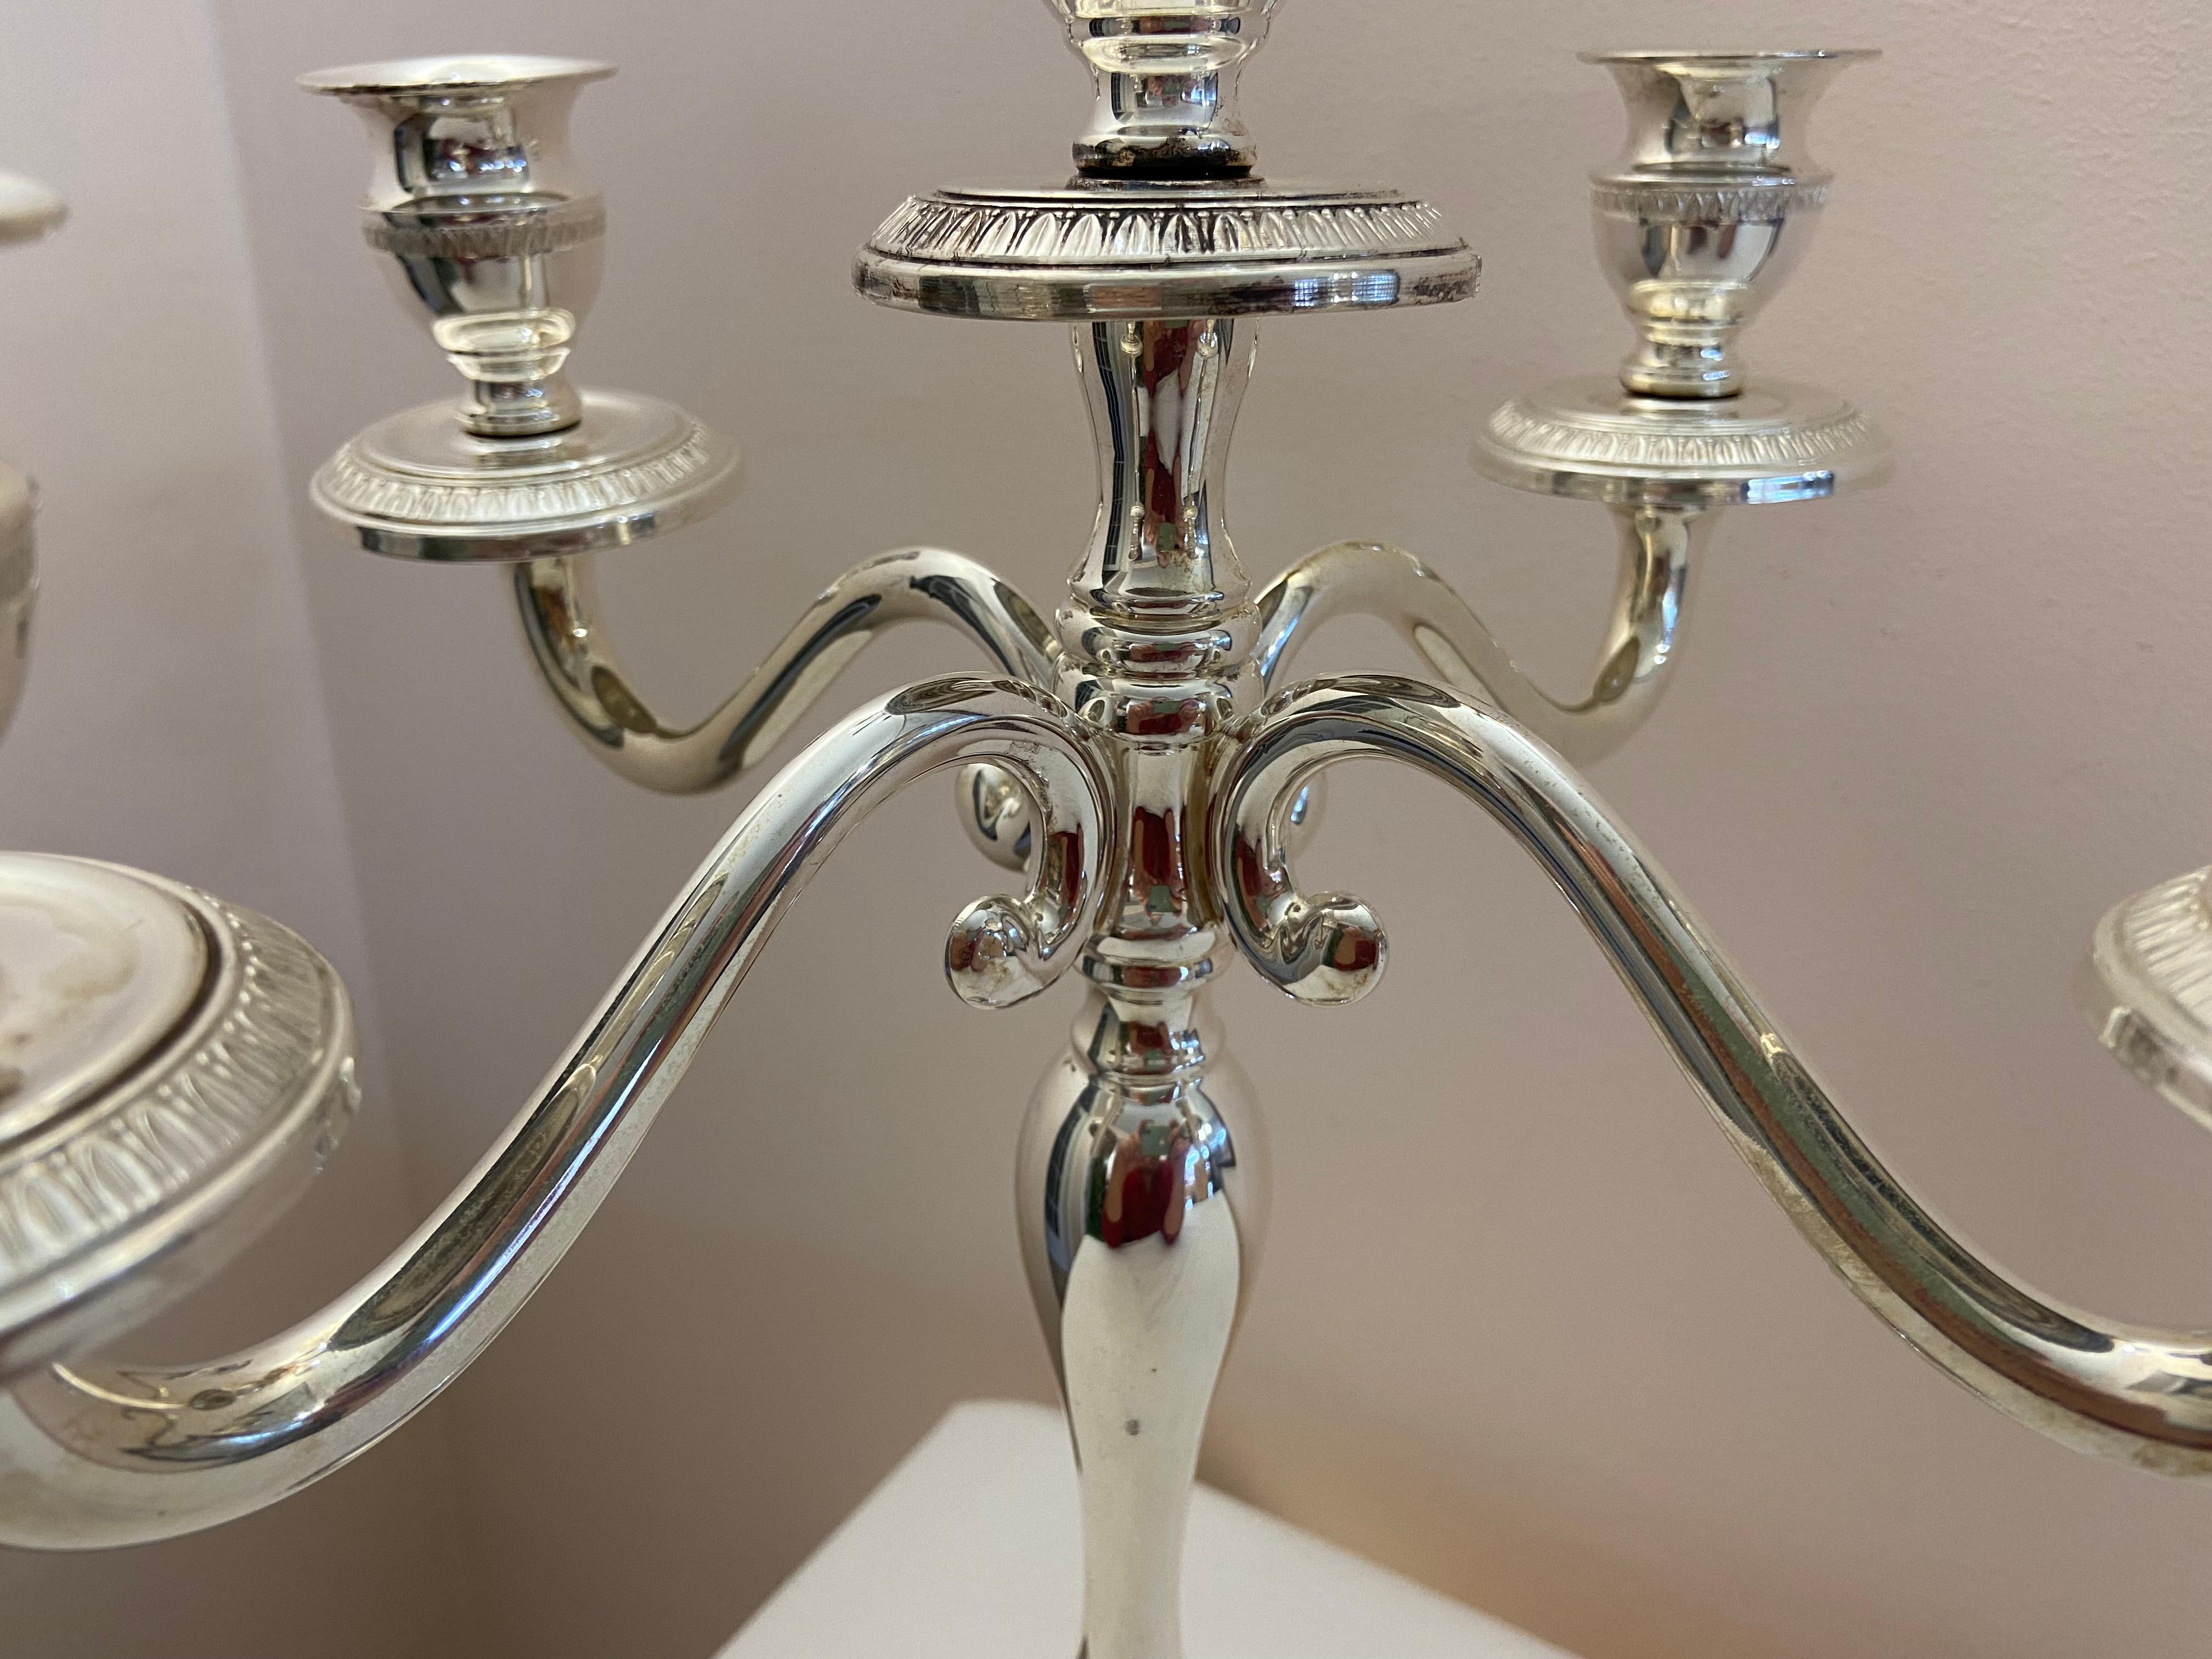 5 Armed Candelabra, 800 Silver, Empire Style.It weighs 625 grams.38 cm high, 32 cm wide. Supplied with candles.
Regularly stamped with state marks. I ship in an elegant gift box.